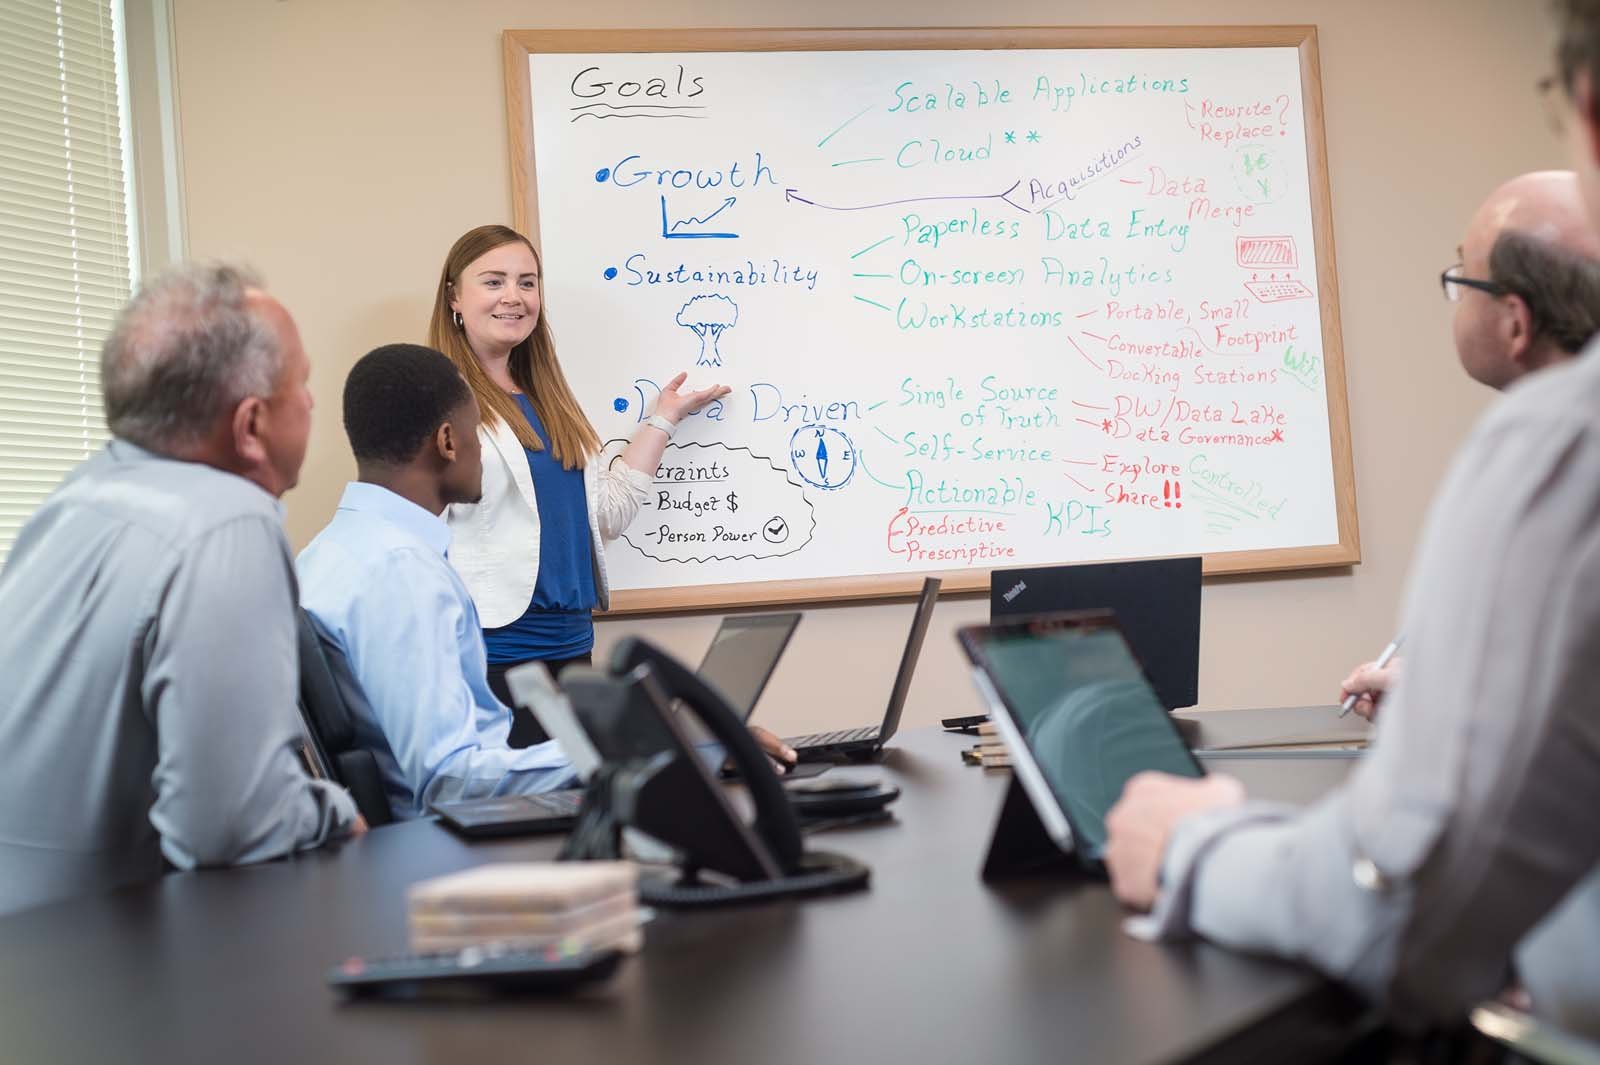 Woman presenting at a whiteboard